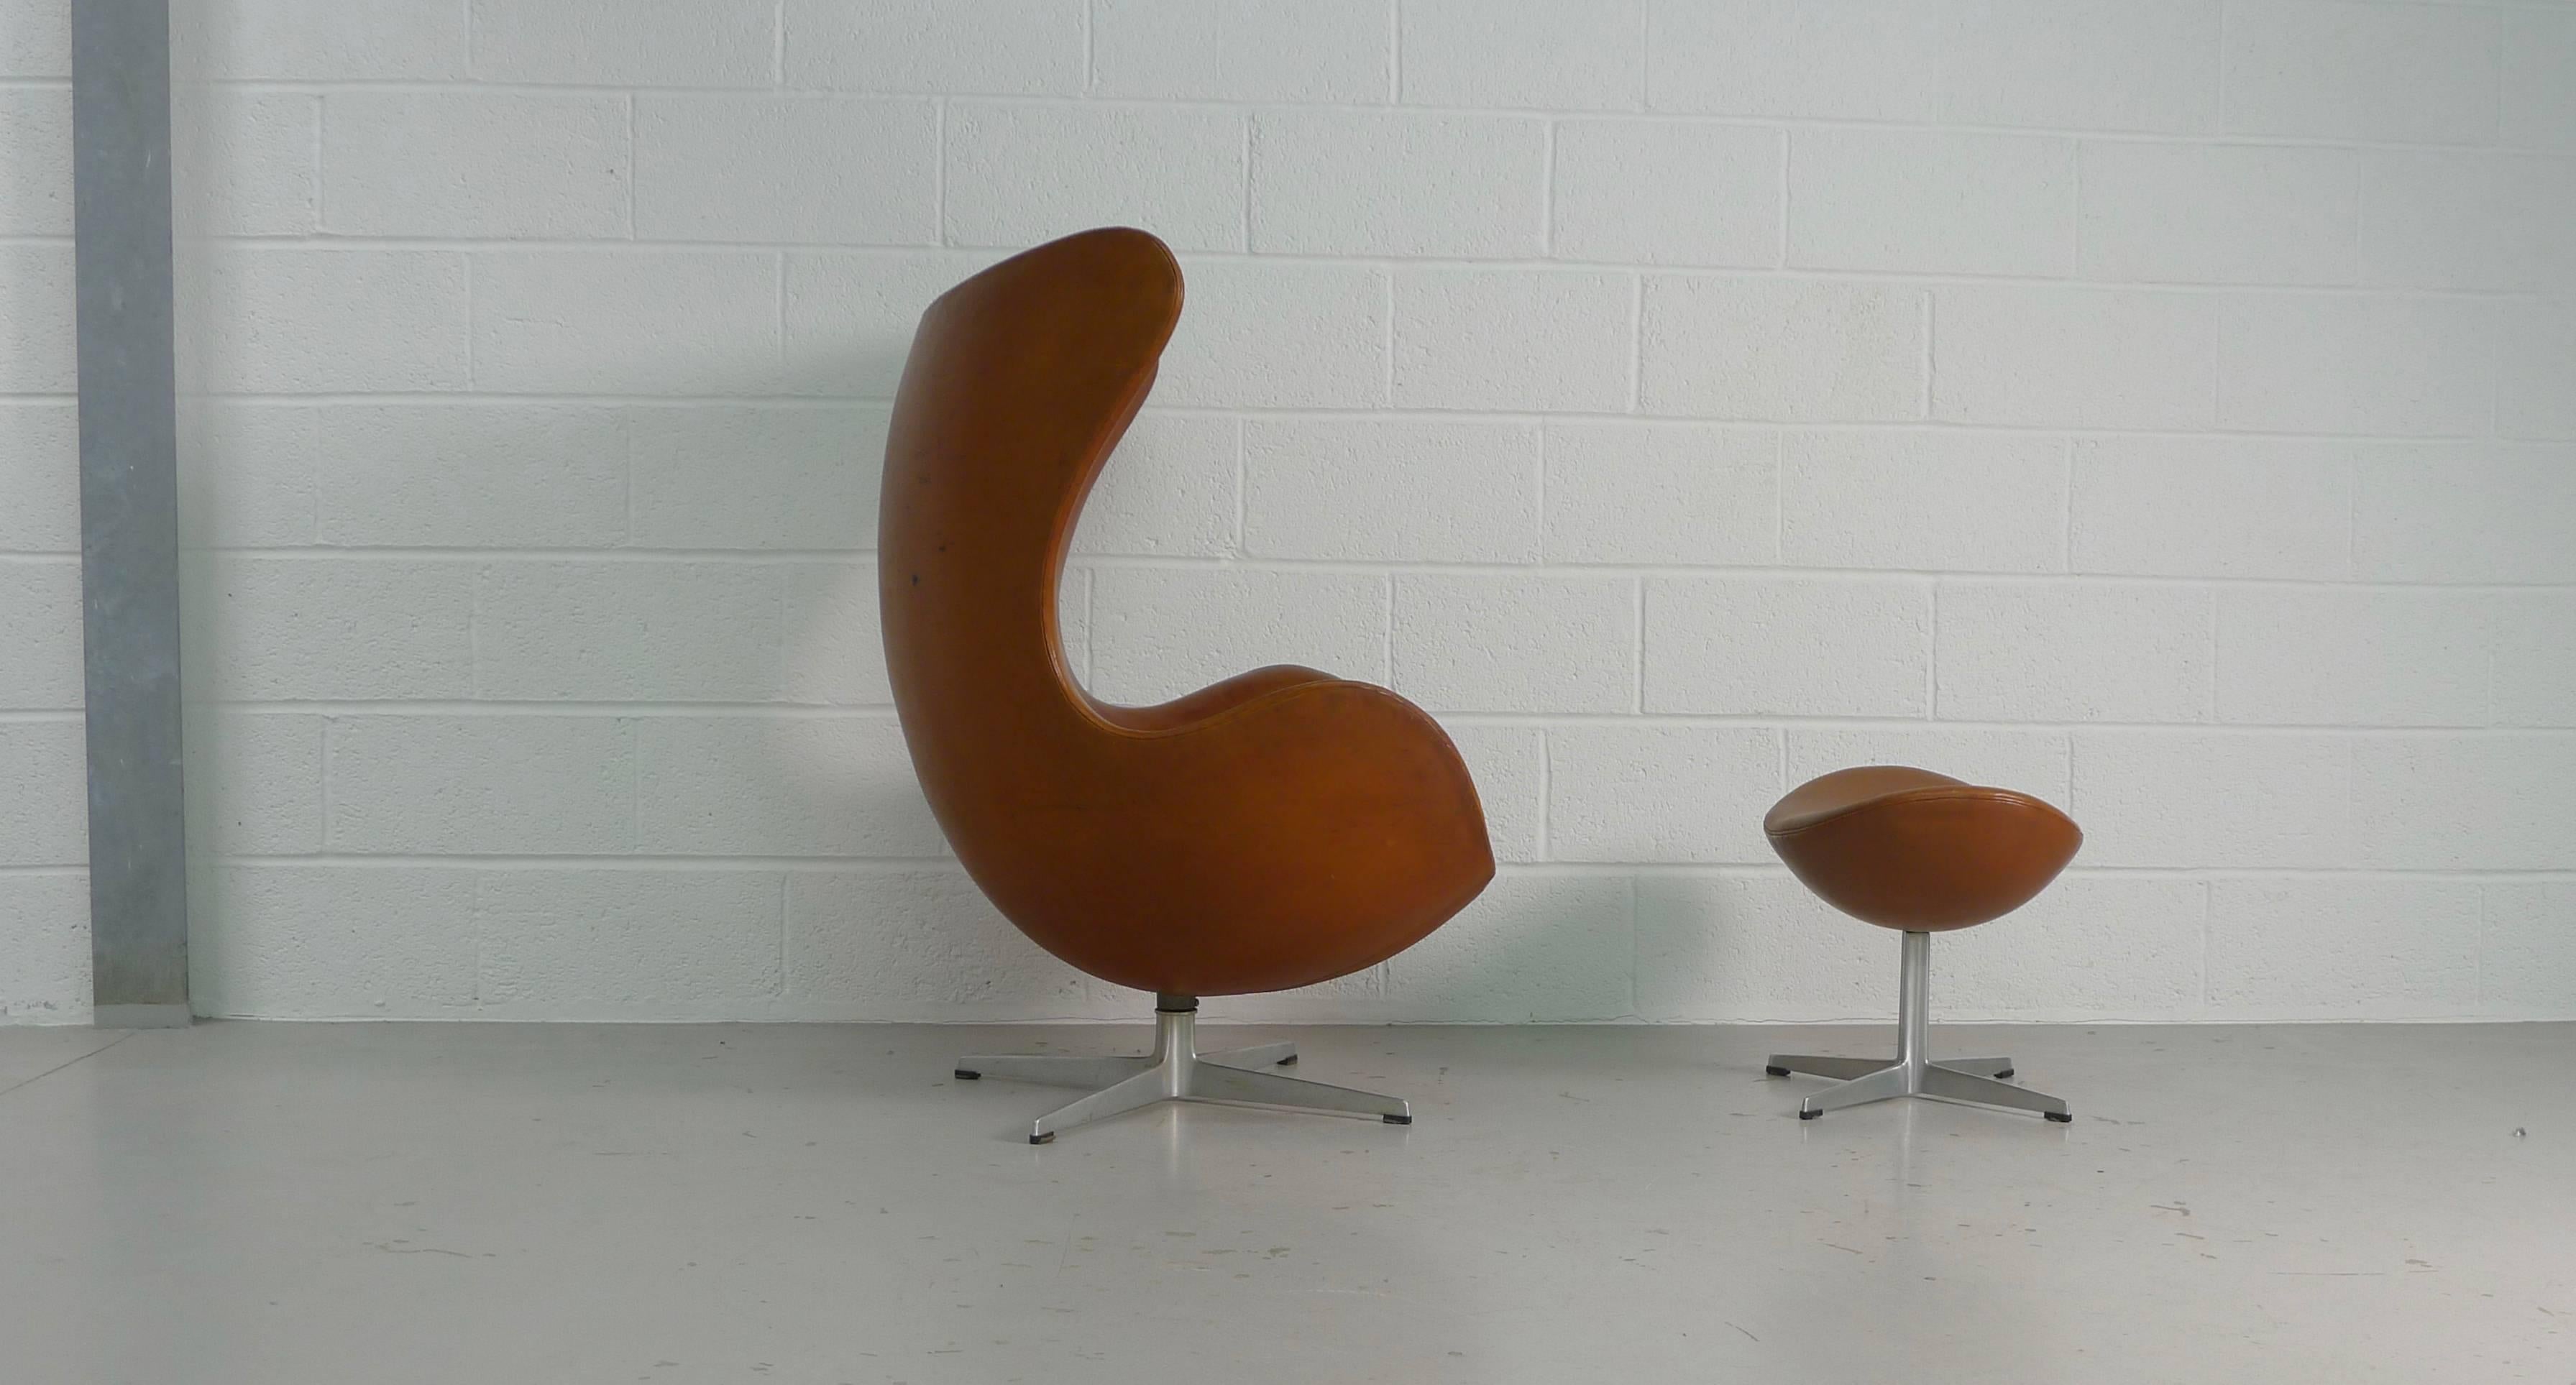 Arne Jacobsen for Fritz Hansen, Denmark, 1958. This example was produced in December, 1966 and both chair and ottoman carry matching dated labels. Gorgeous original brown leather, aluminium profiled base.
The leather on this chair is over 50 years